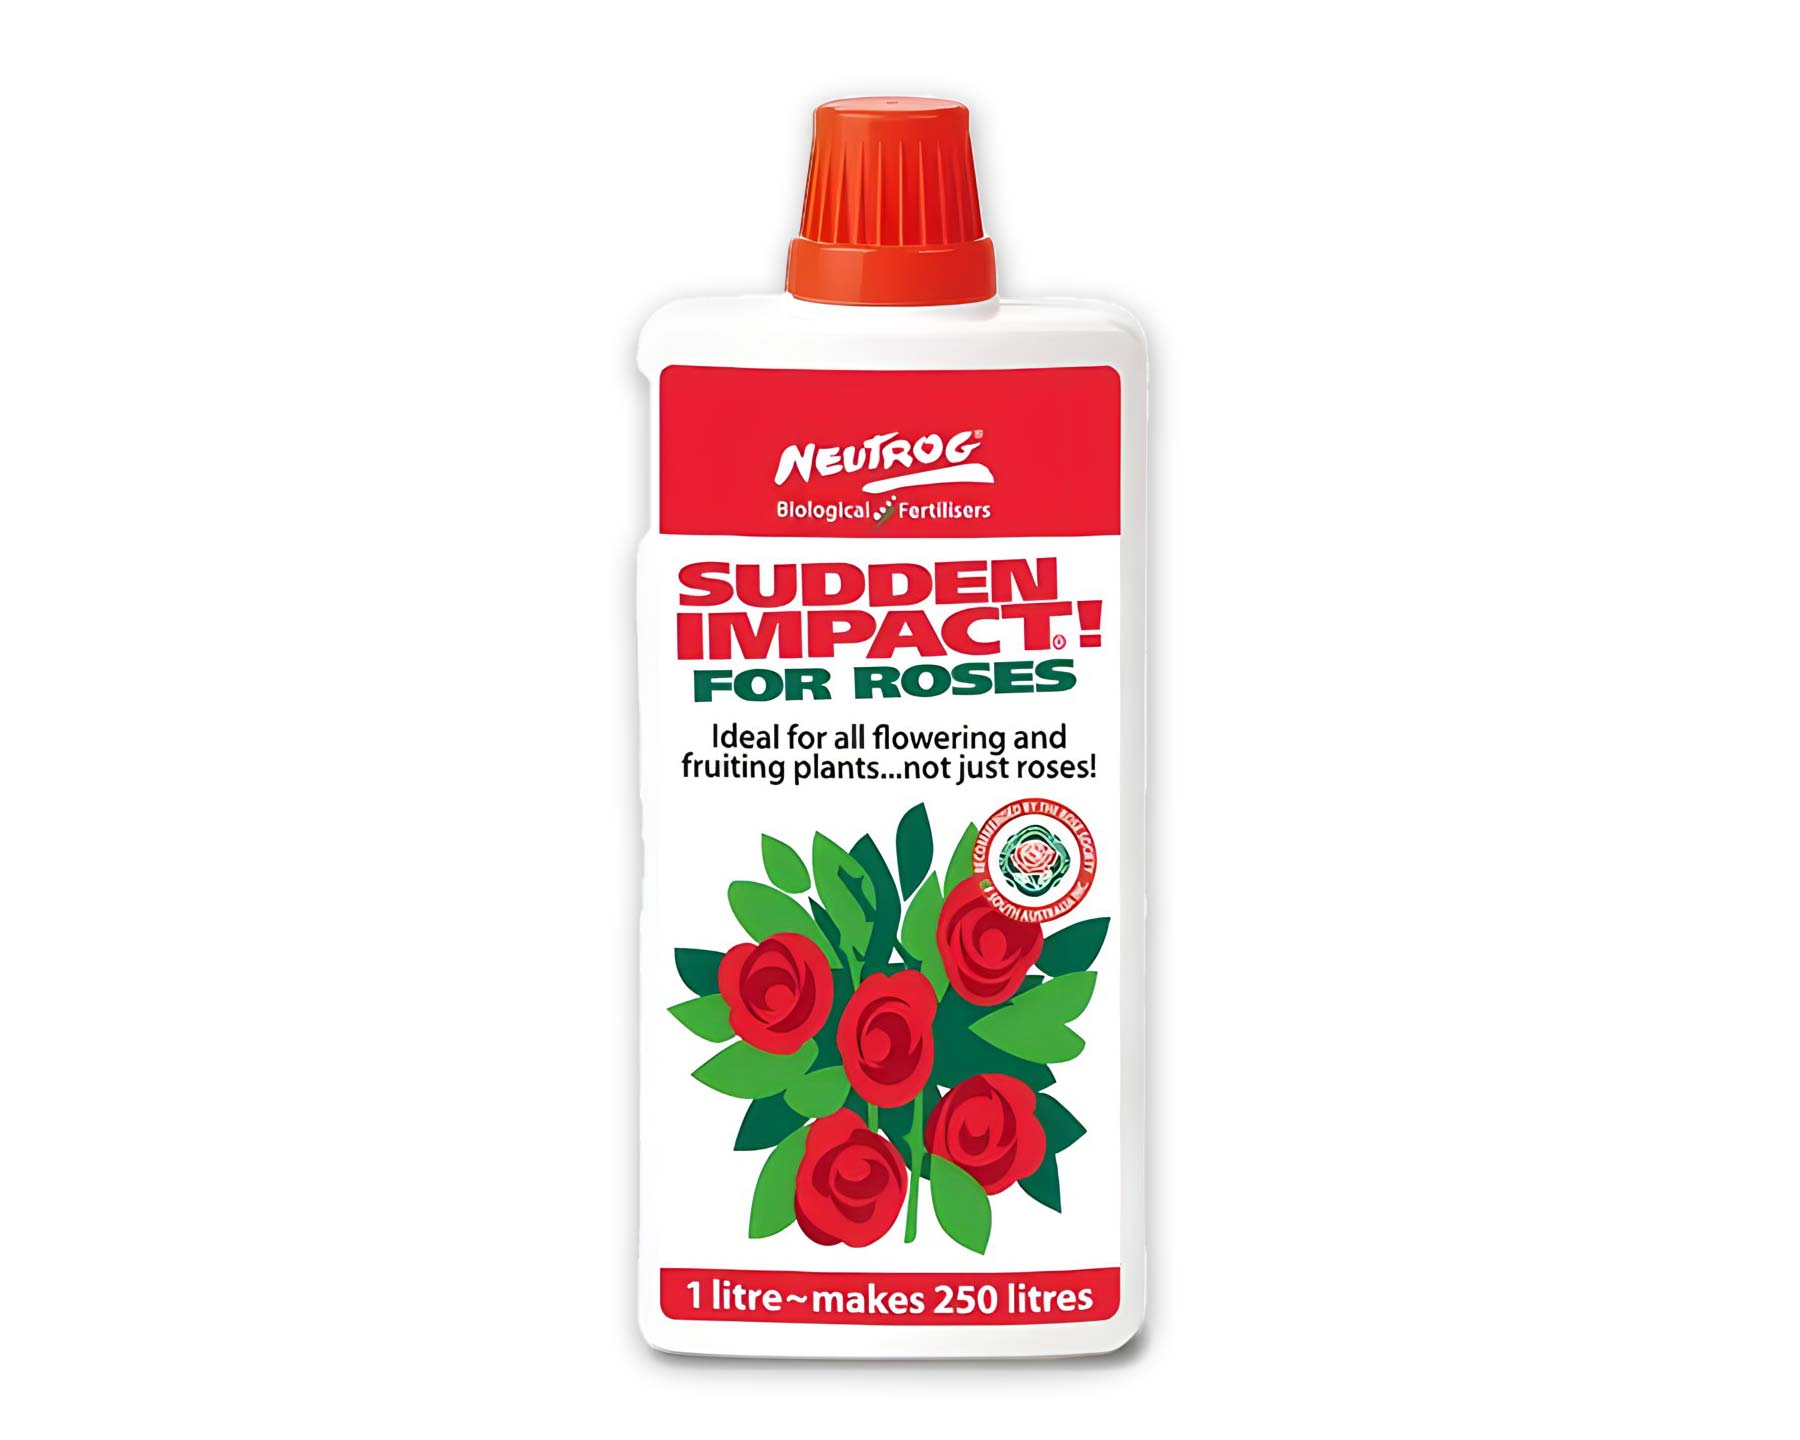 Sudden Impact for Roses in liquid form